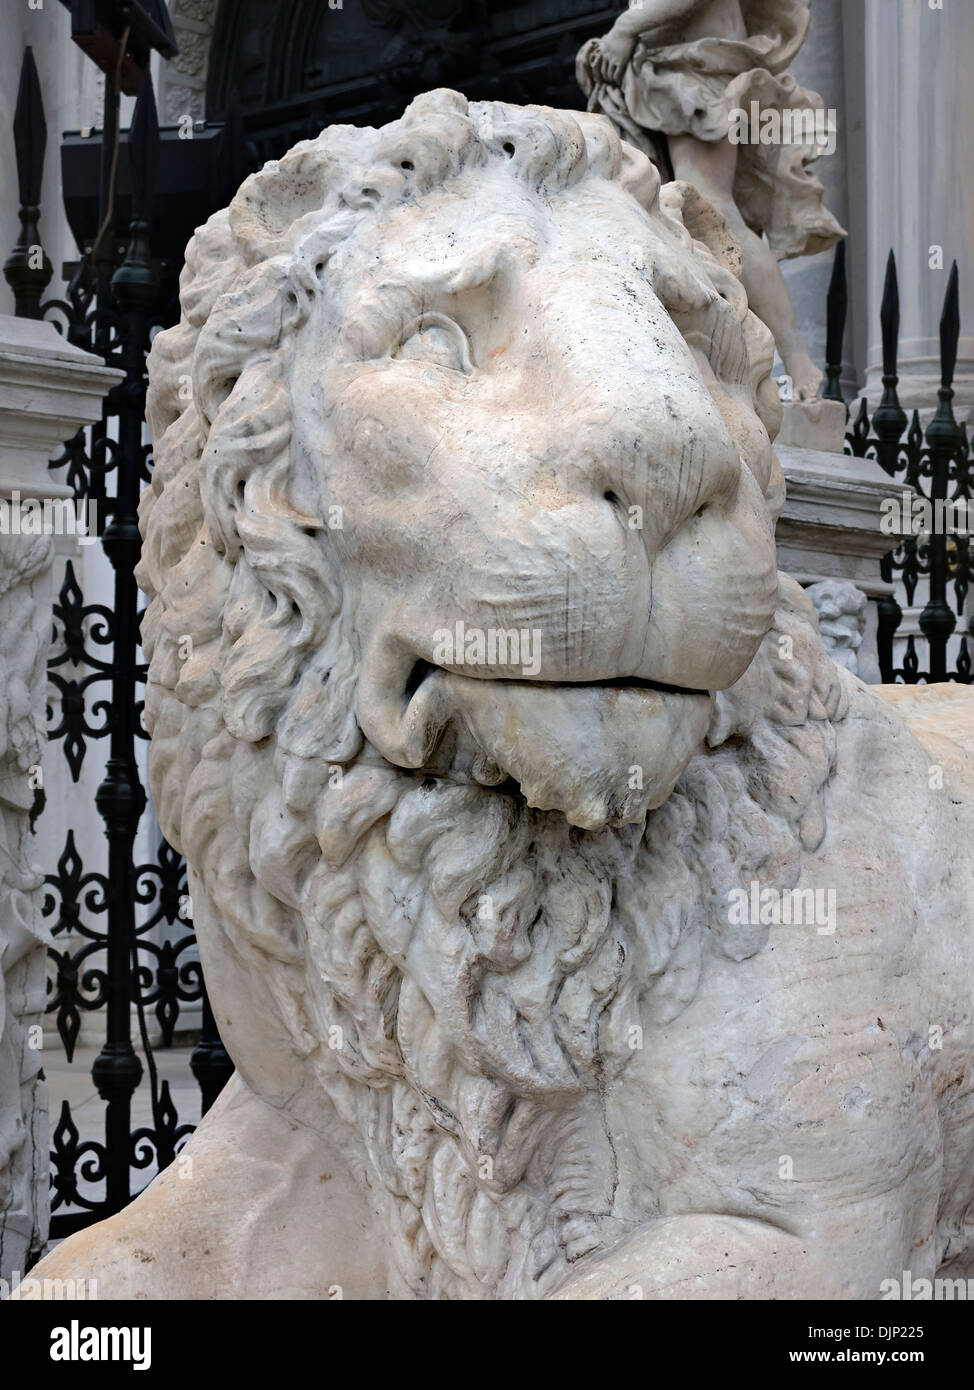 Ornate white carved stone lion statue sculpture outside the Arsenale, Venice, Italy Stock Photo